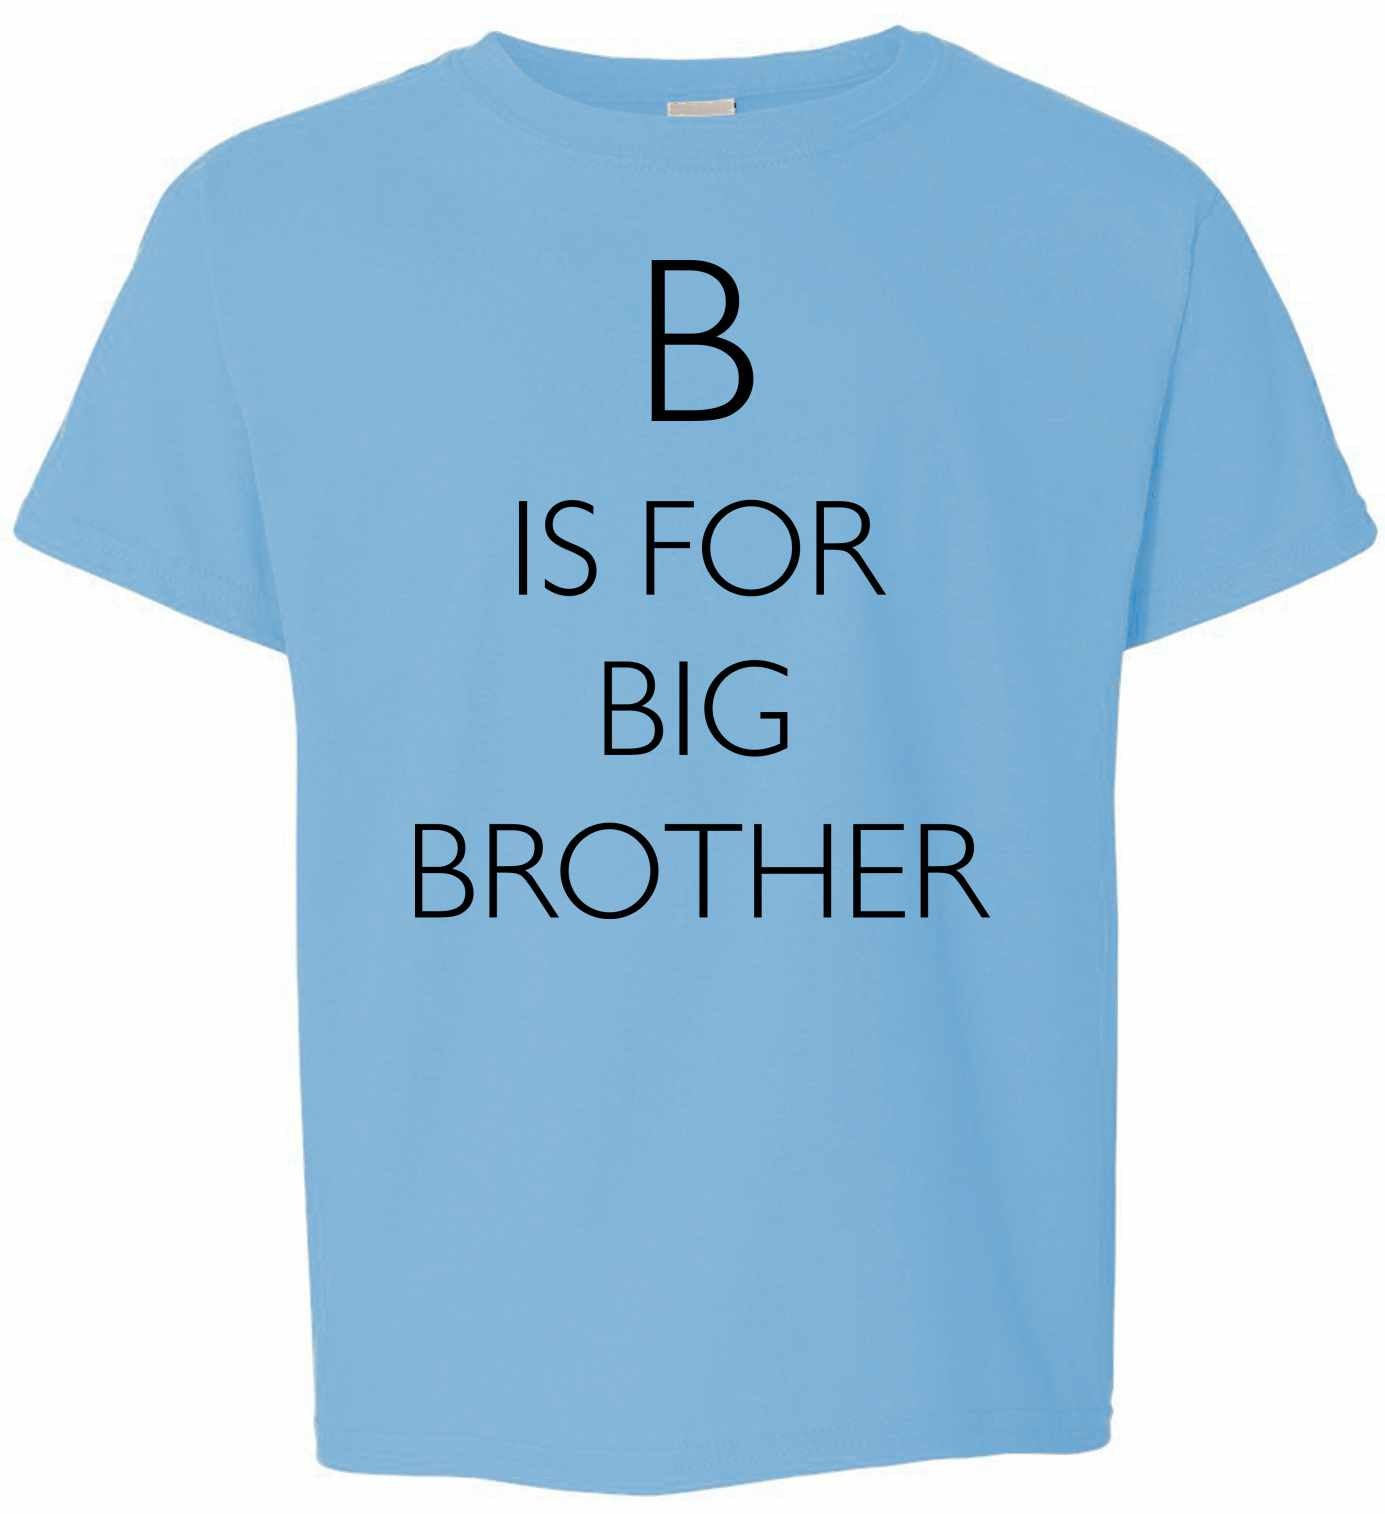 B is for Big Brother Youth T-Shirt (#1179-201)